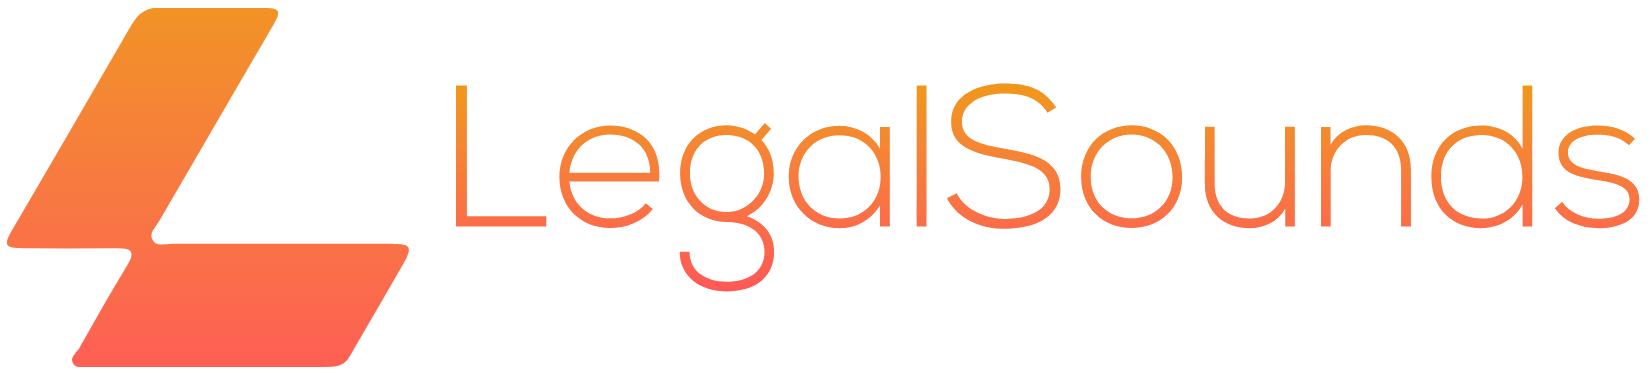 LegalSounds - Home of Legal News